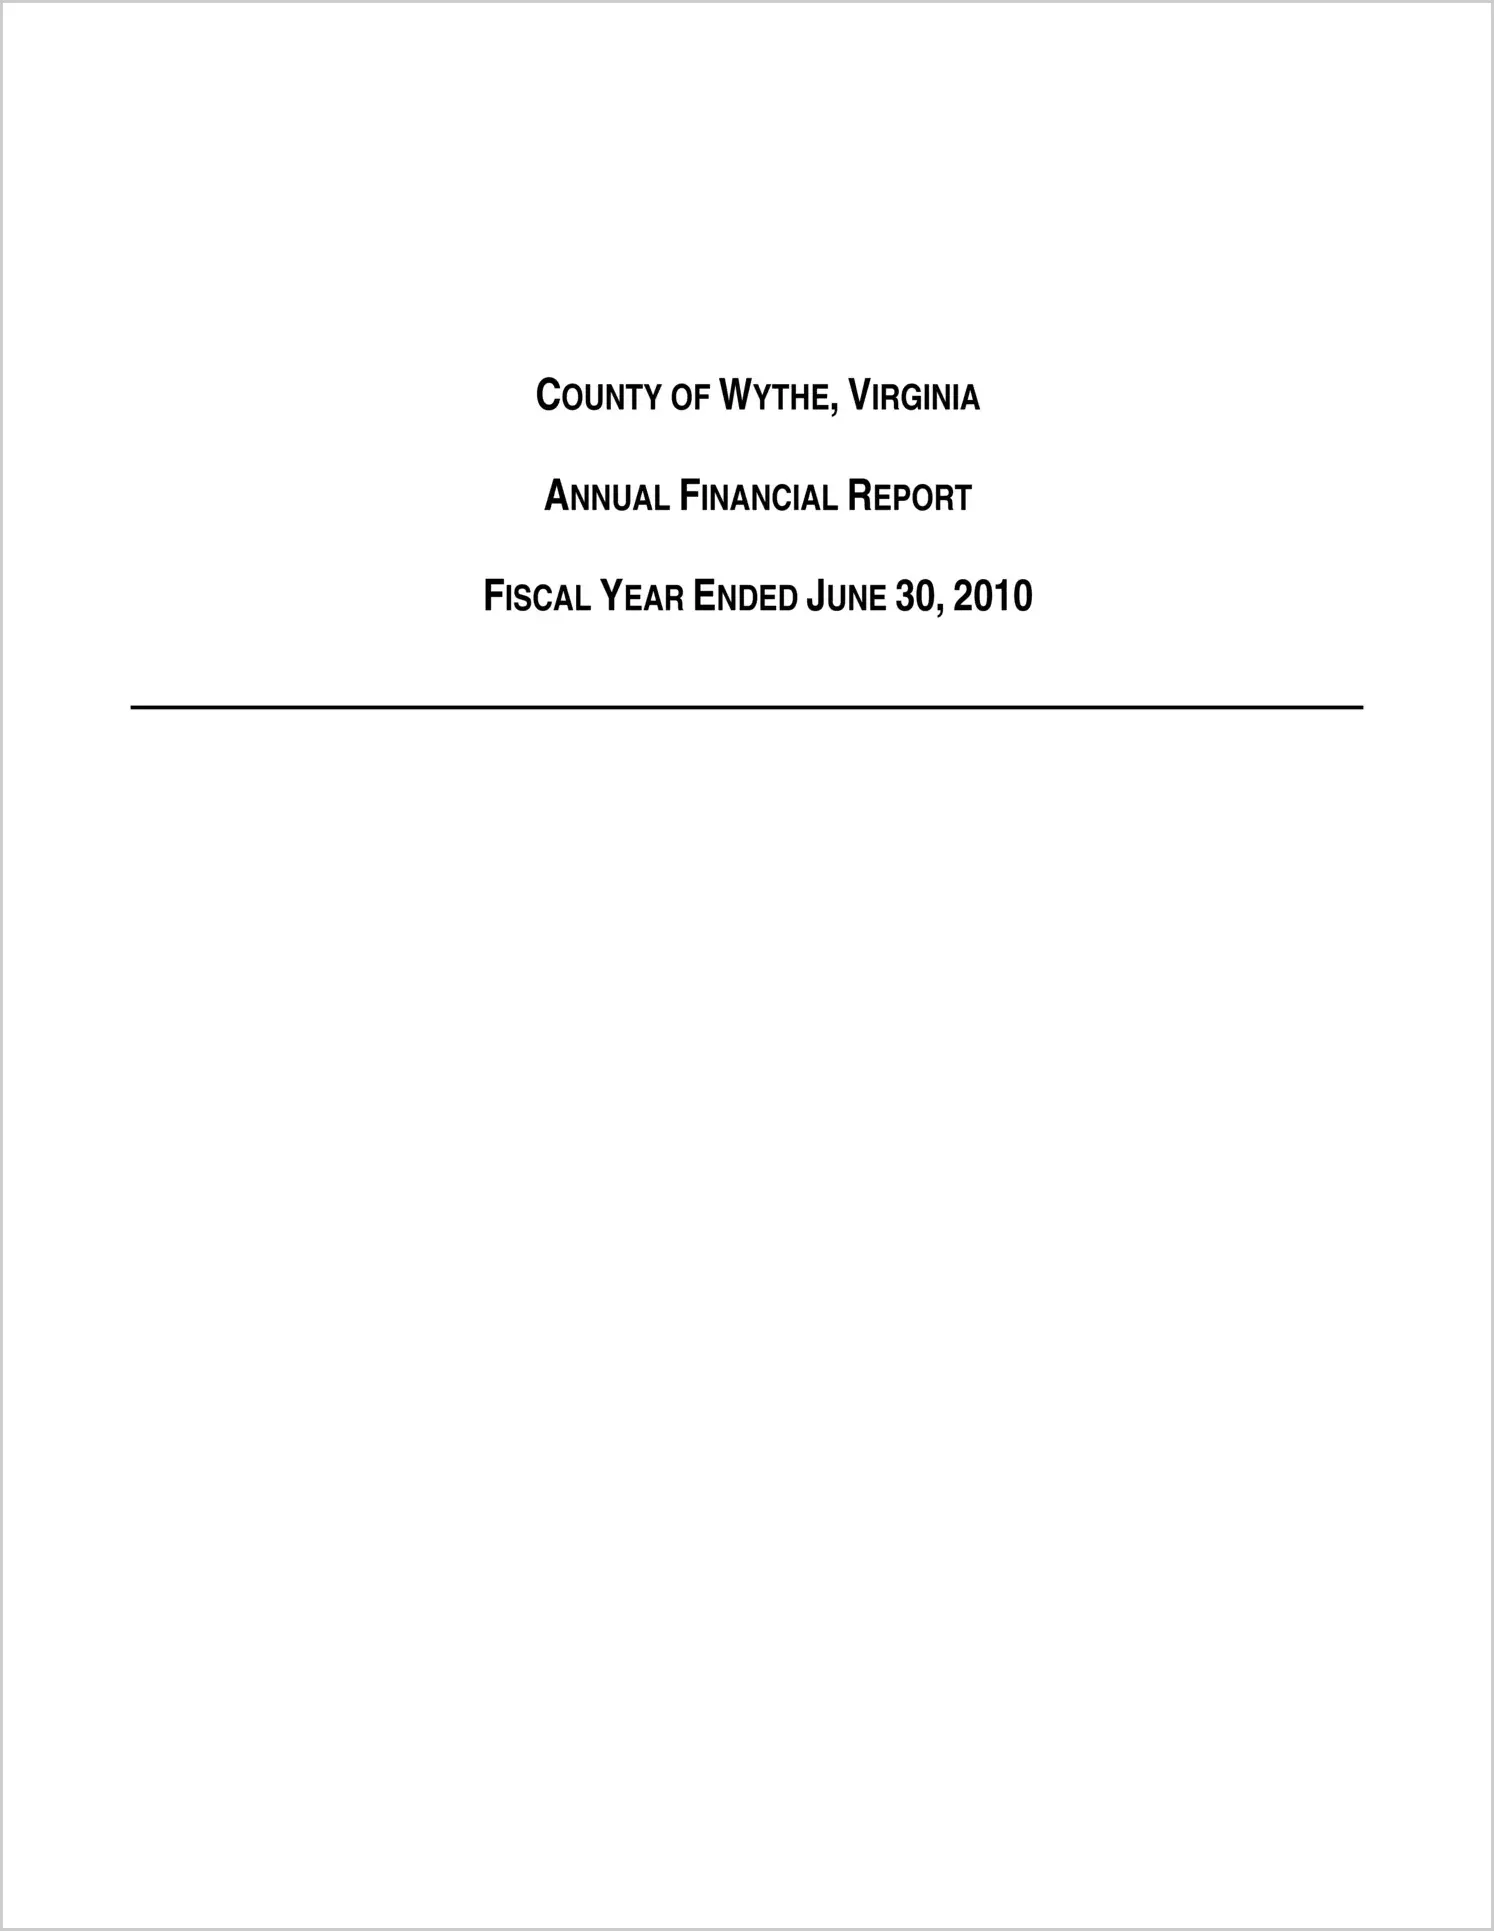 2010 Annual Financial Report for County of Wythe